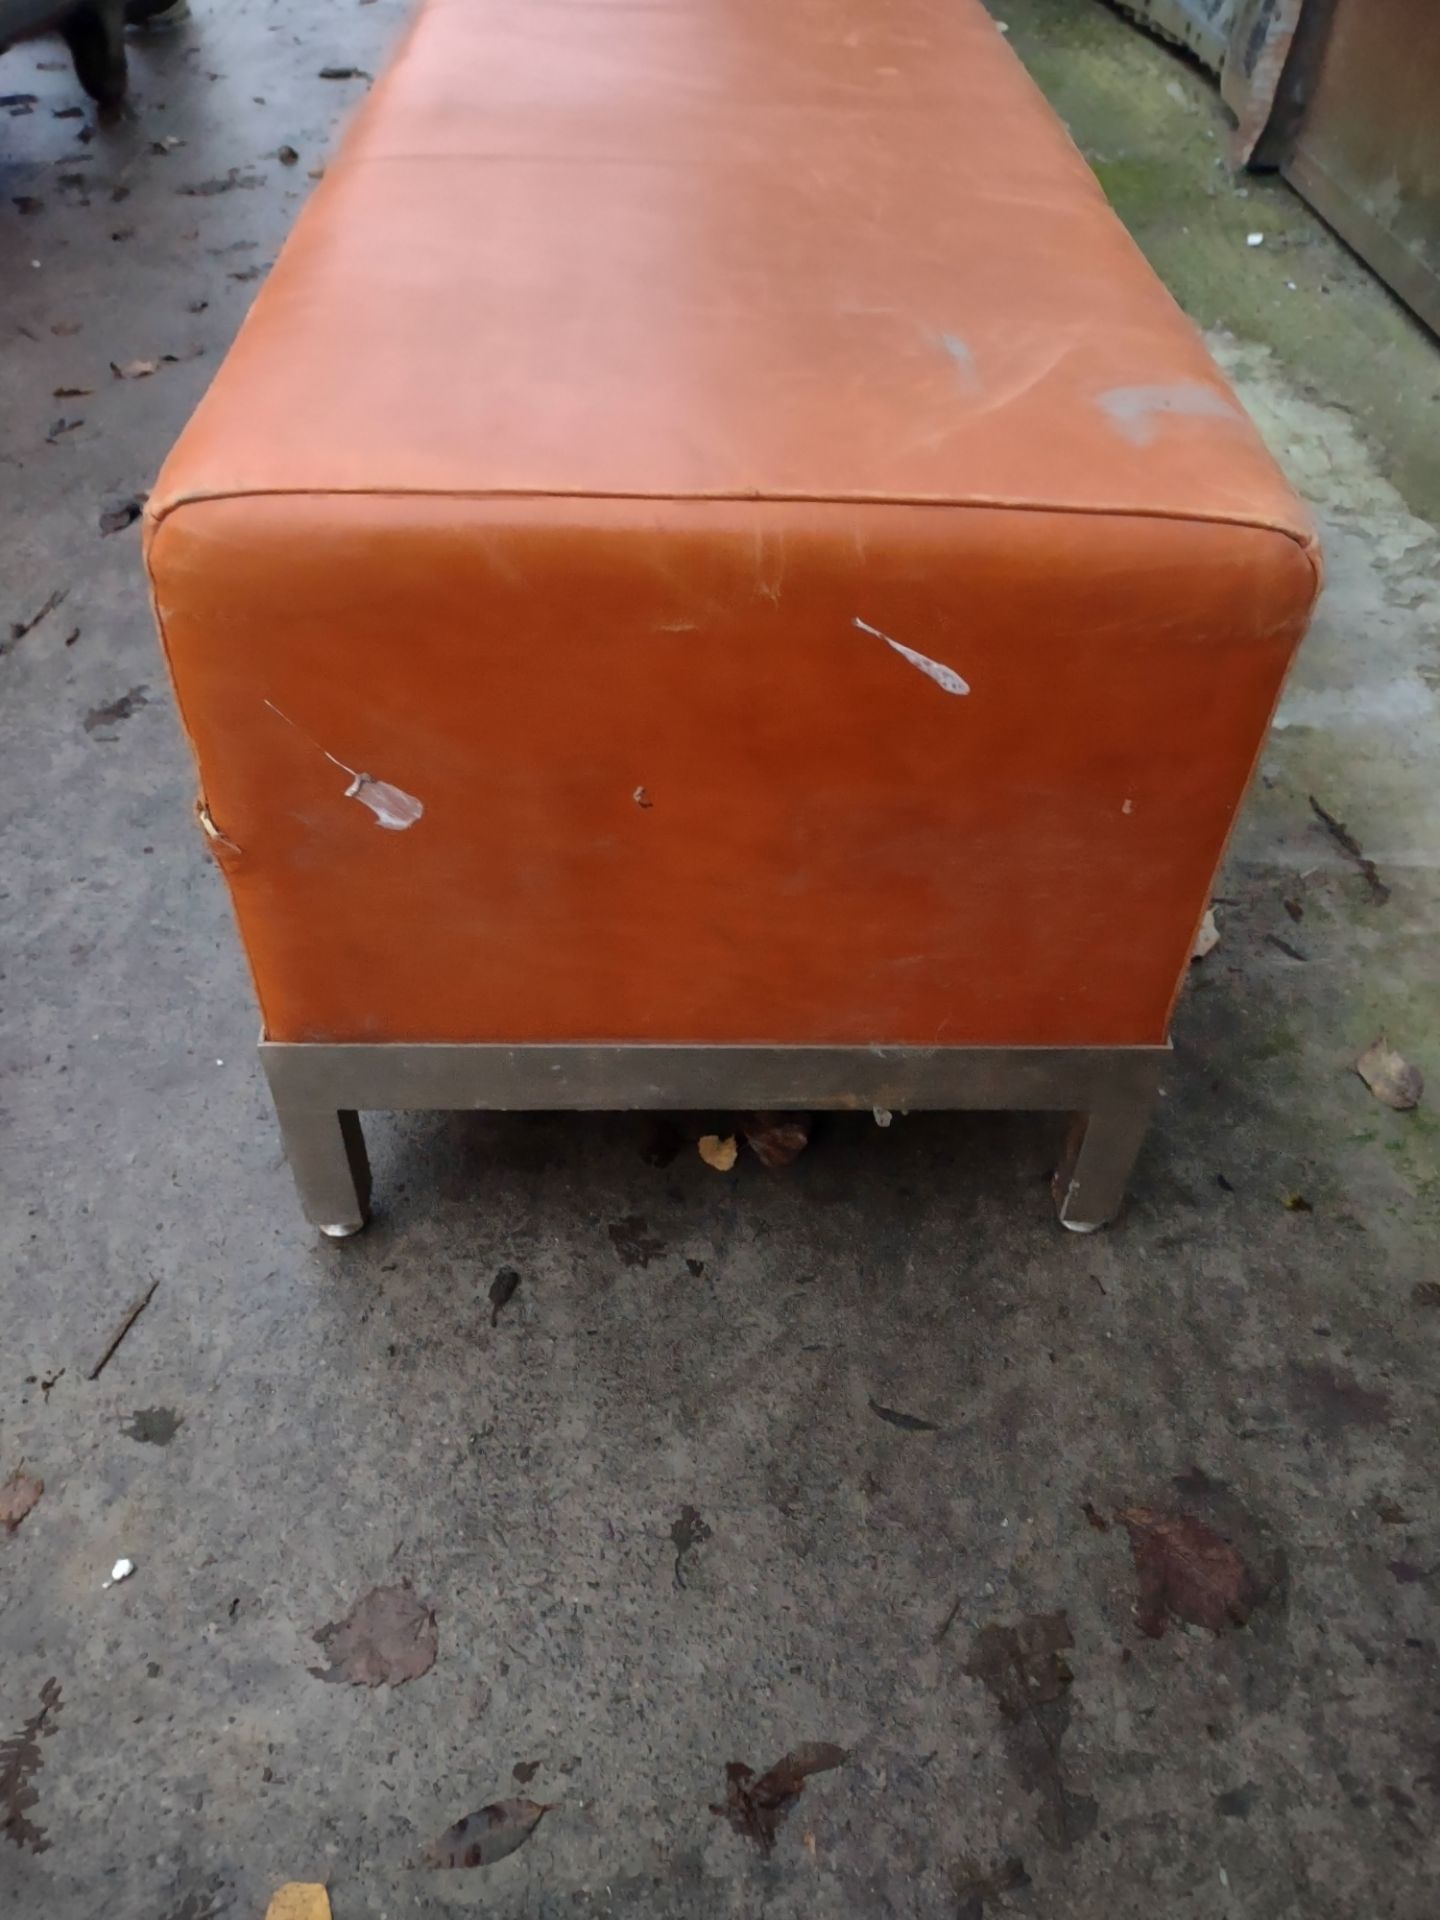 Vintage Look Leather Foot Stool 113*44*44cm Sourced From Luxury House Clearance - Image 4 of 4